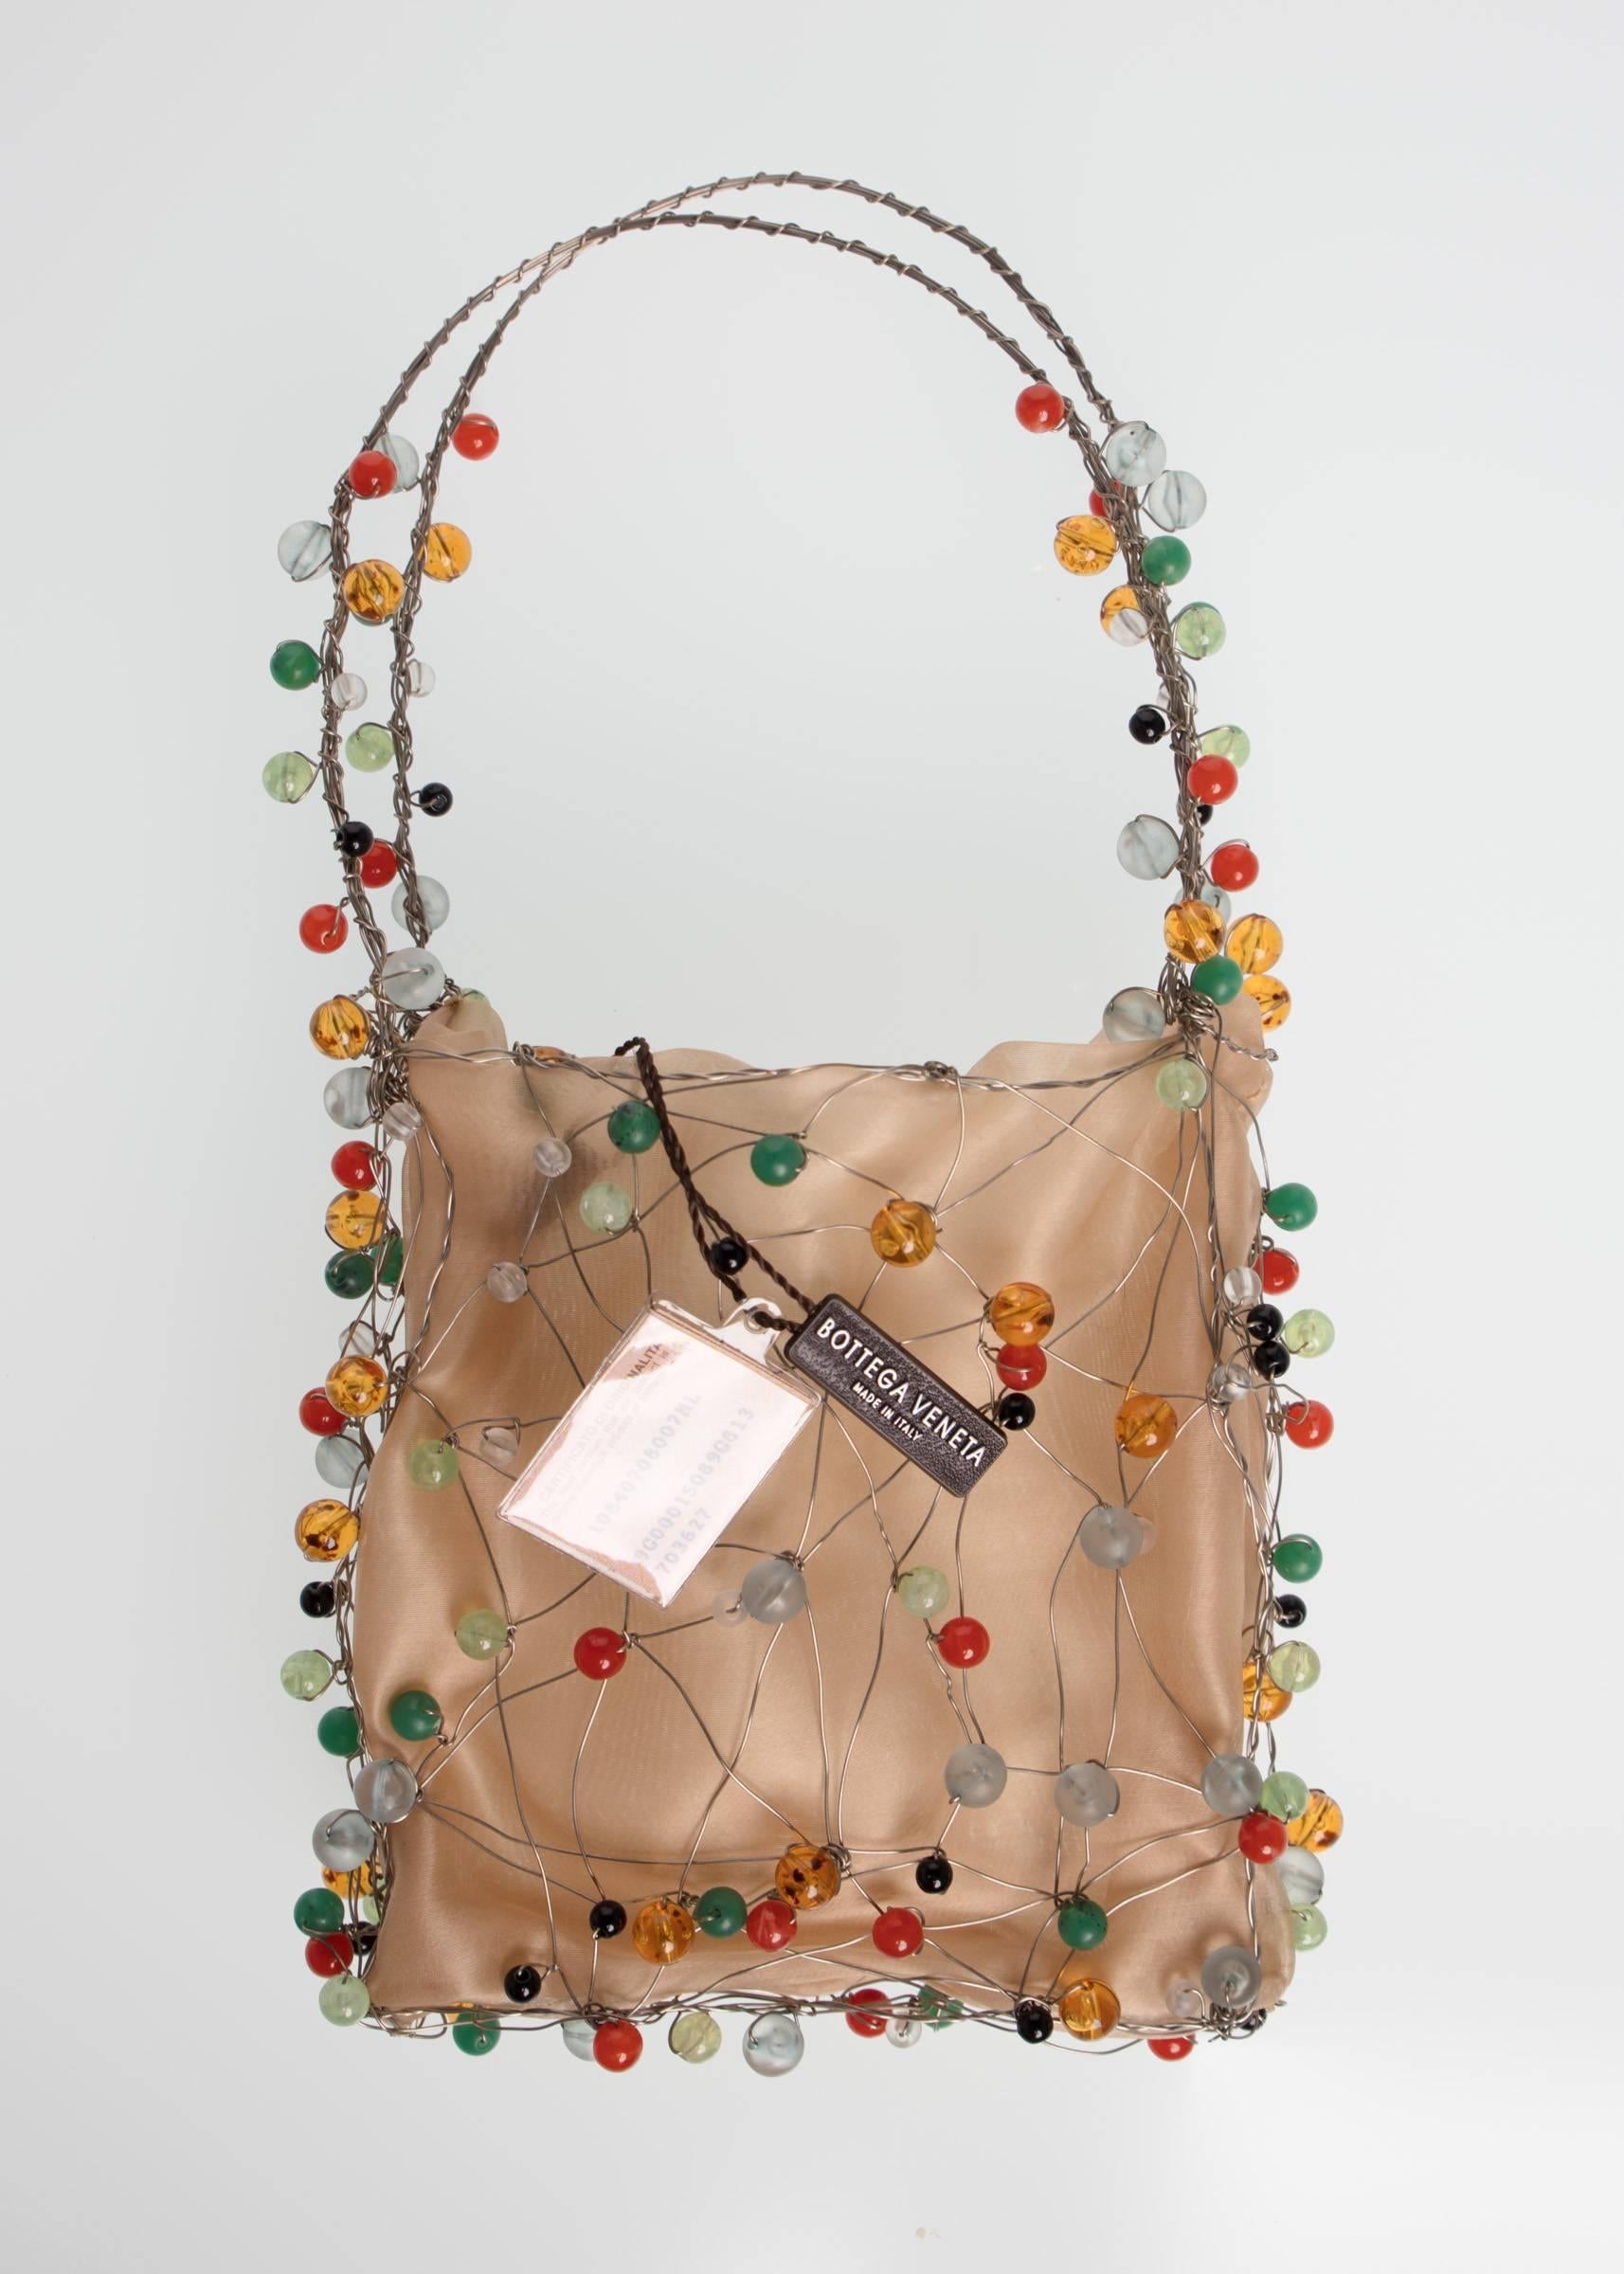 Beaded handbags were all the rage for much of the 19th century.  Called reticules, these small bags would carry only the barest of necessities and tended to be more of a decorative accessory than functional. This contemporary version by Bottega